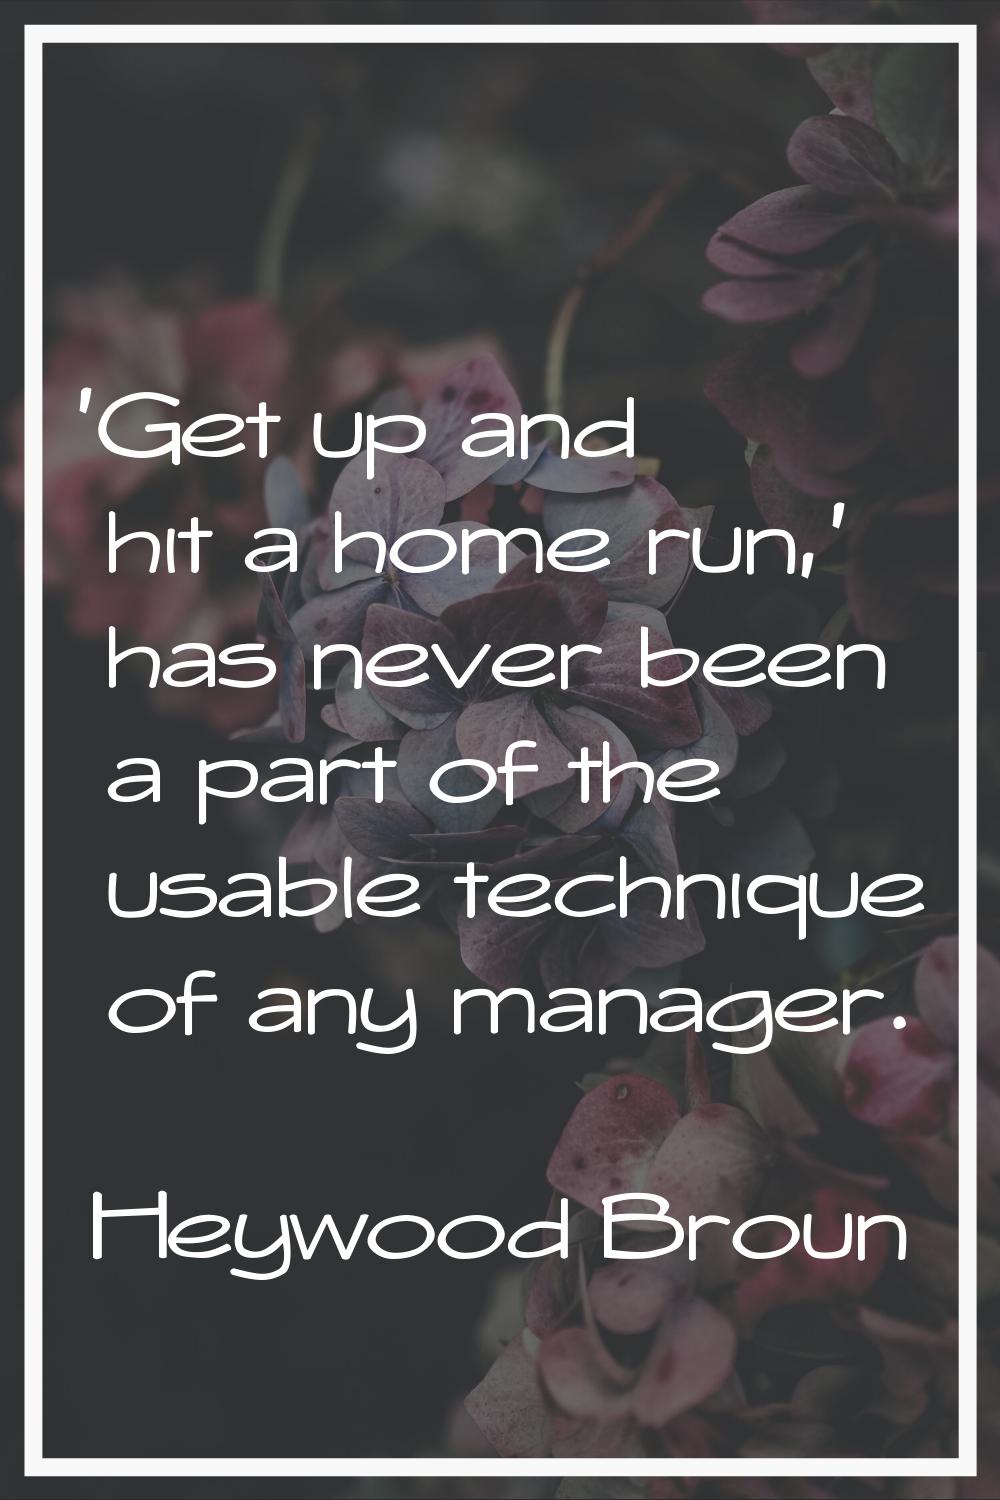 'Get up and hit a home run,' has never been a part of the usable technique of any manager.